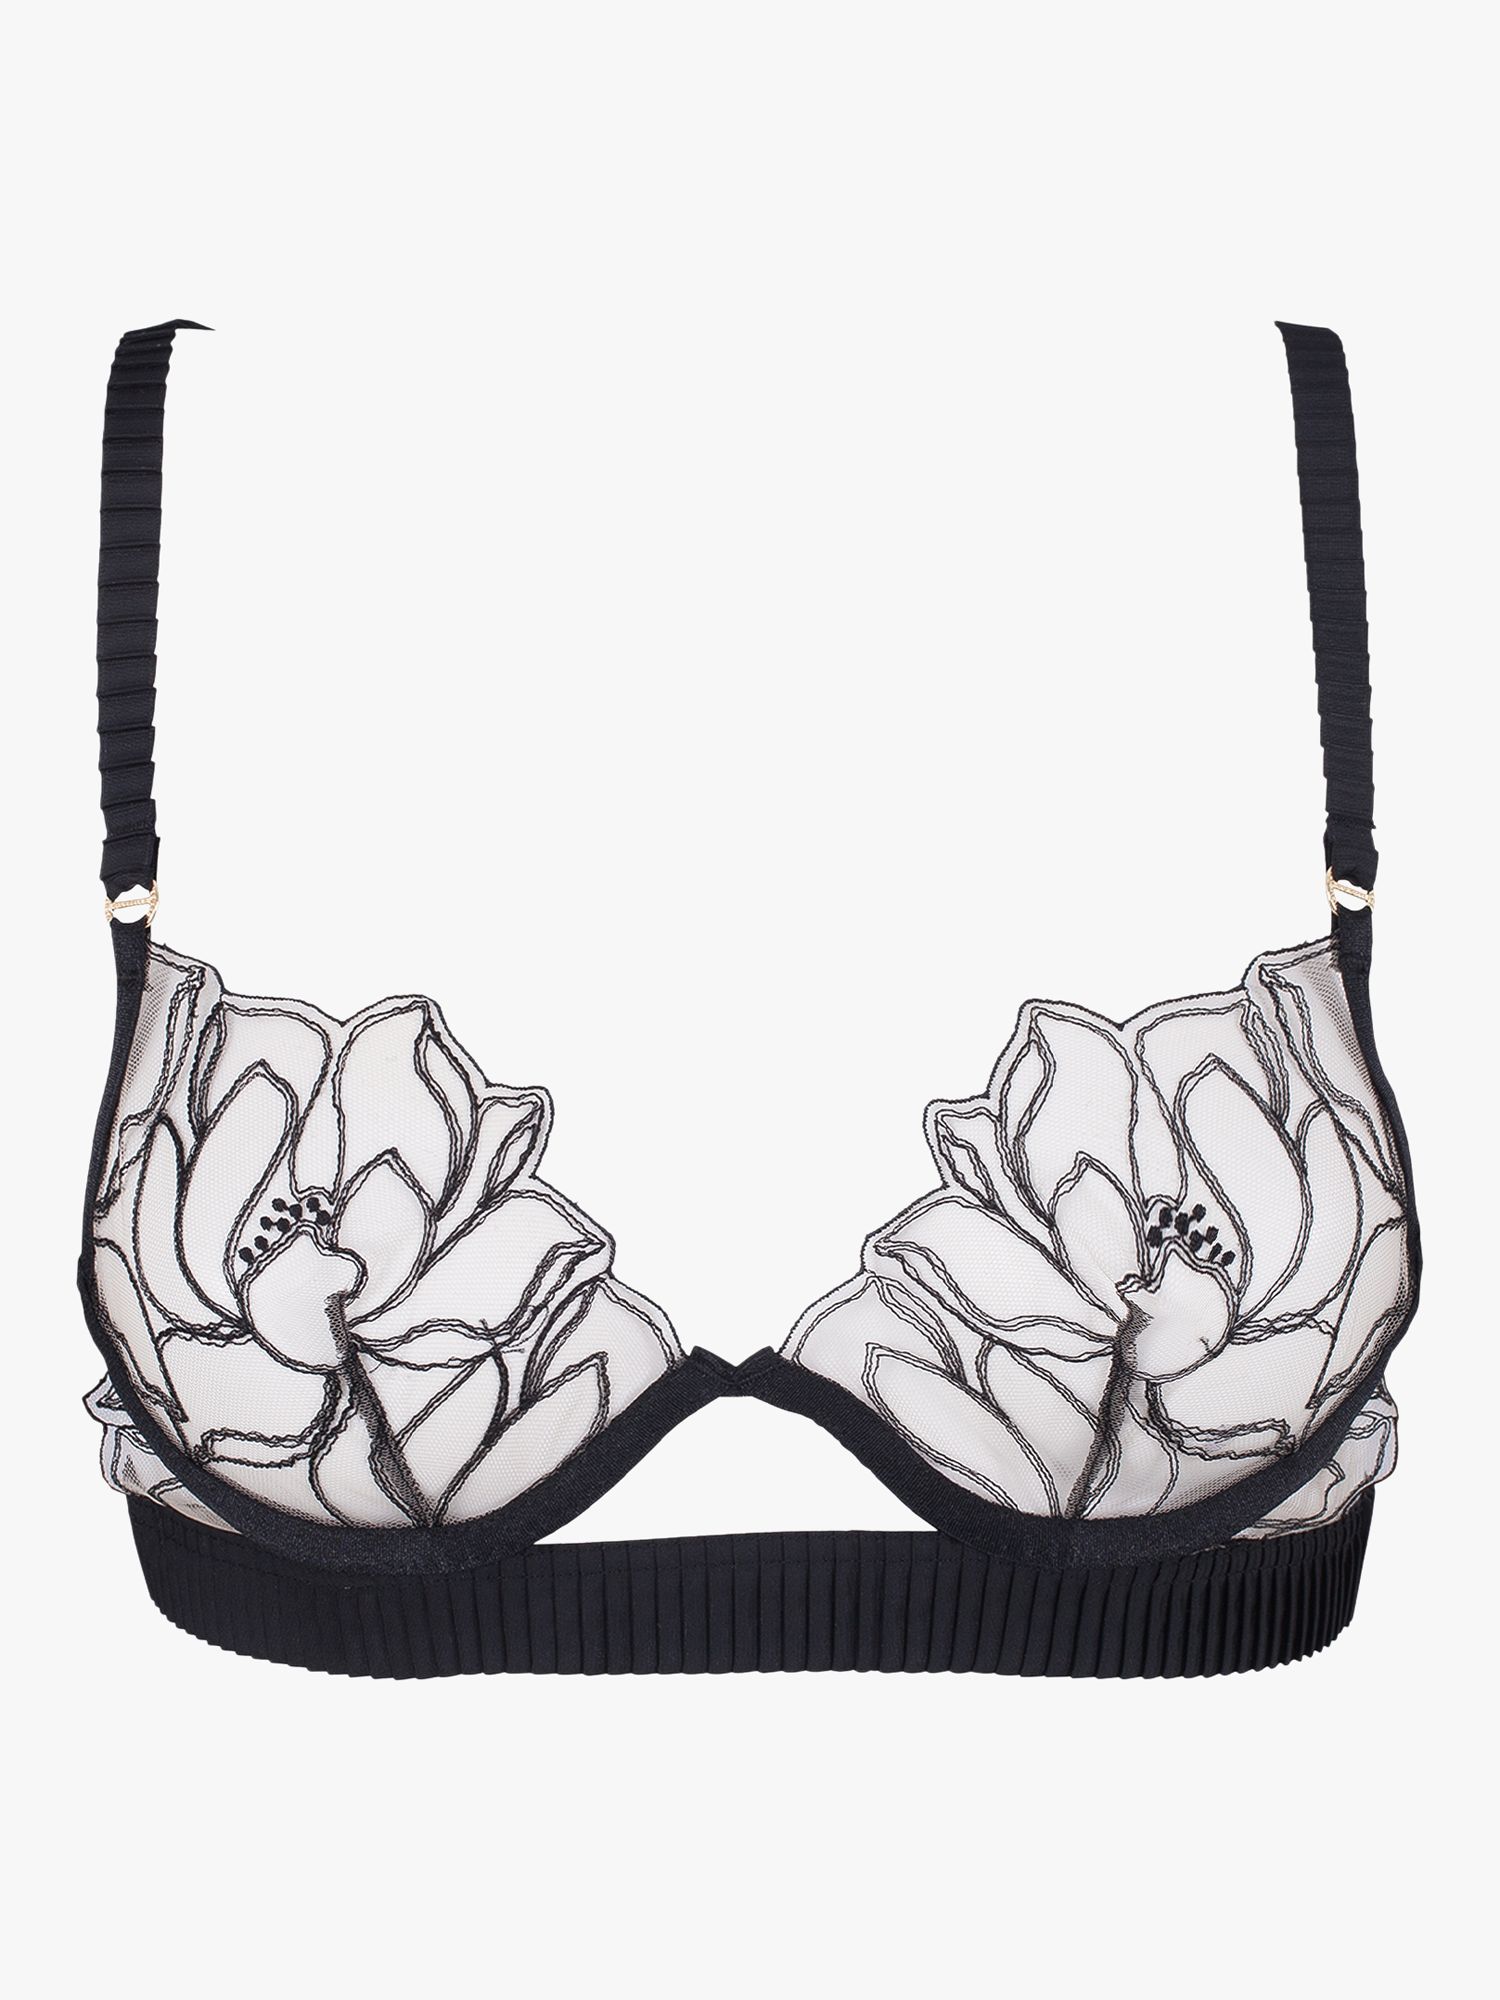 Bluebella Sheer Embroidered 1/4 Cup Bra in Black